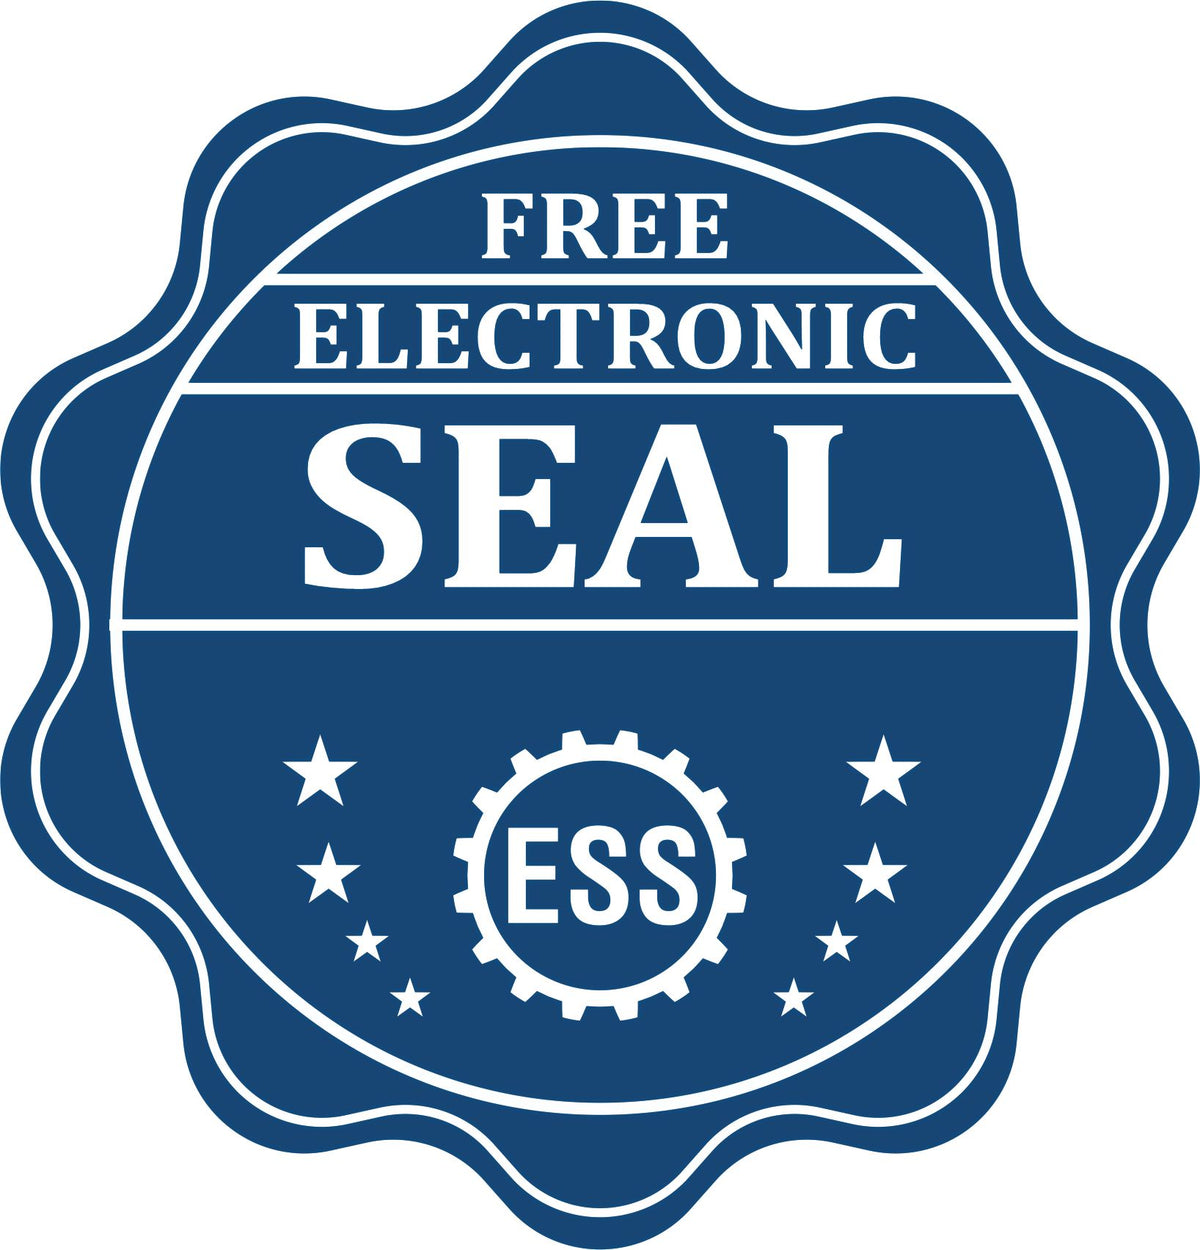 A badge showing a free electronic seal for the Slim Pre-Inked Hawaii Professional Engineer Seal Stamp with stars and the ESS gear on the emblem.